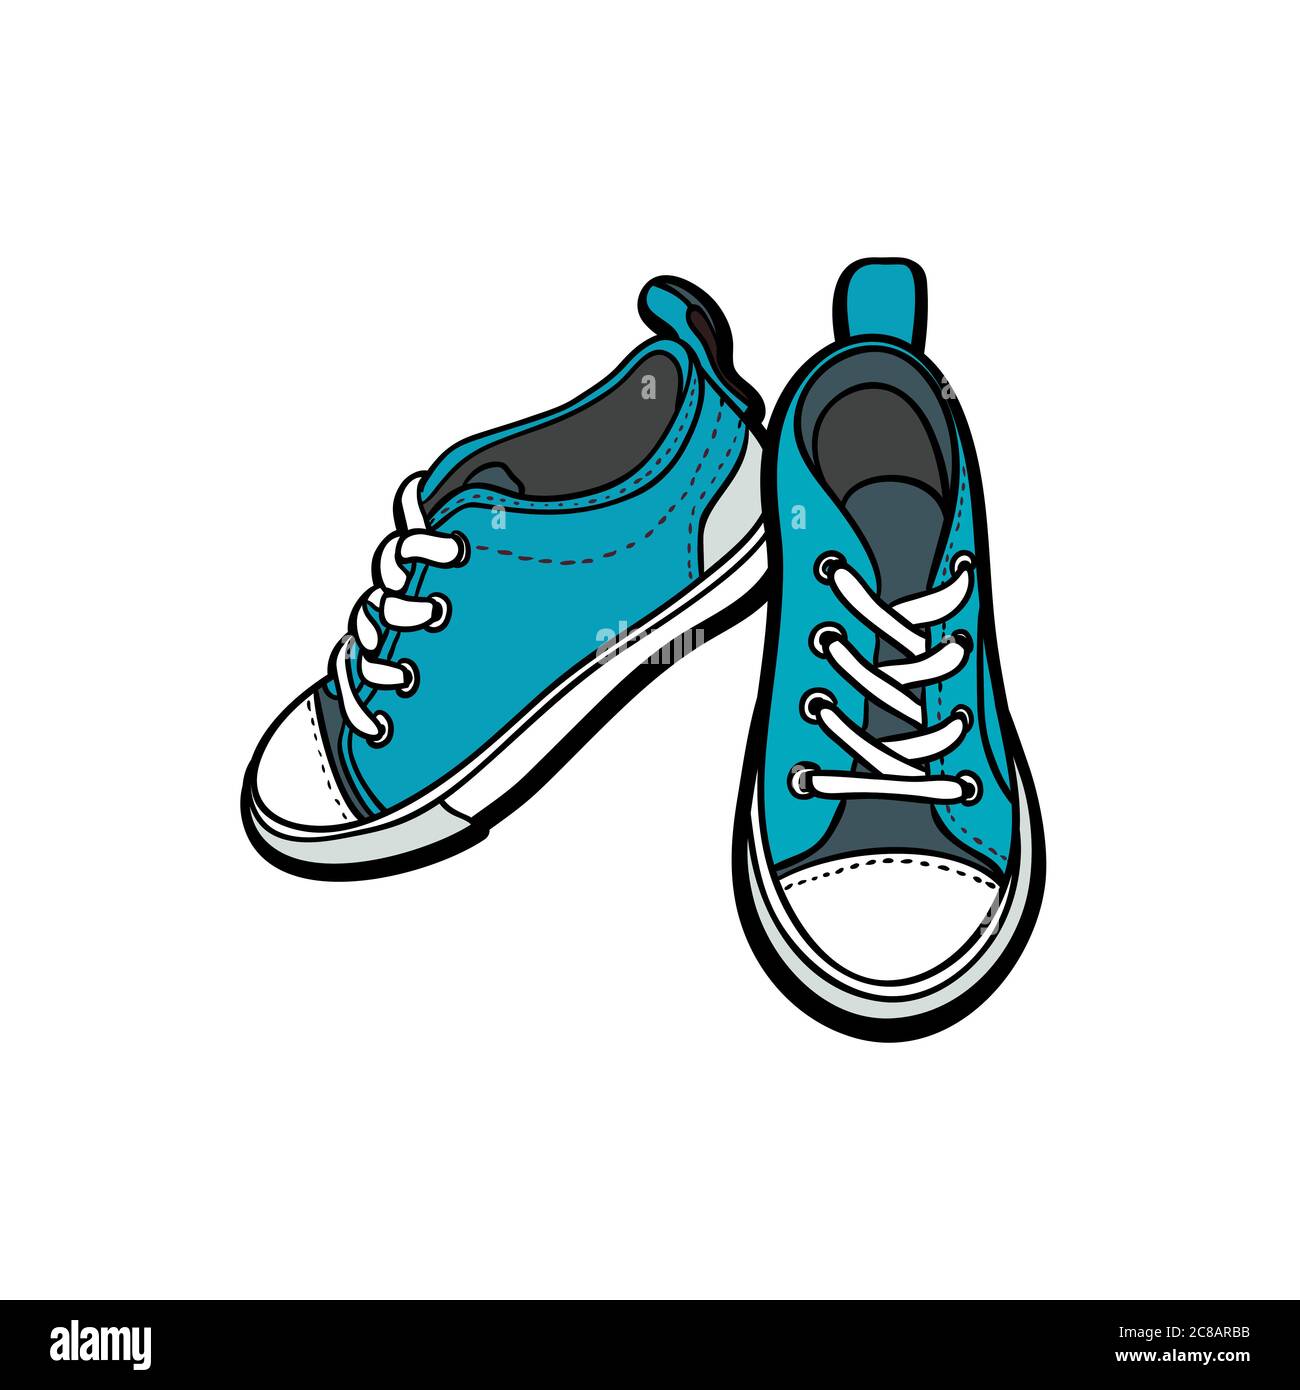 Sneakers shoes pair isolated. Hand drawn vector illustration of blue ...